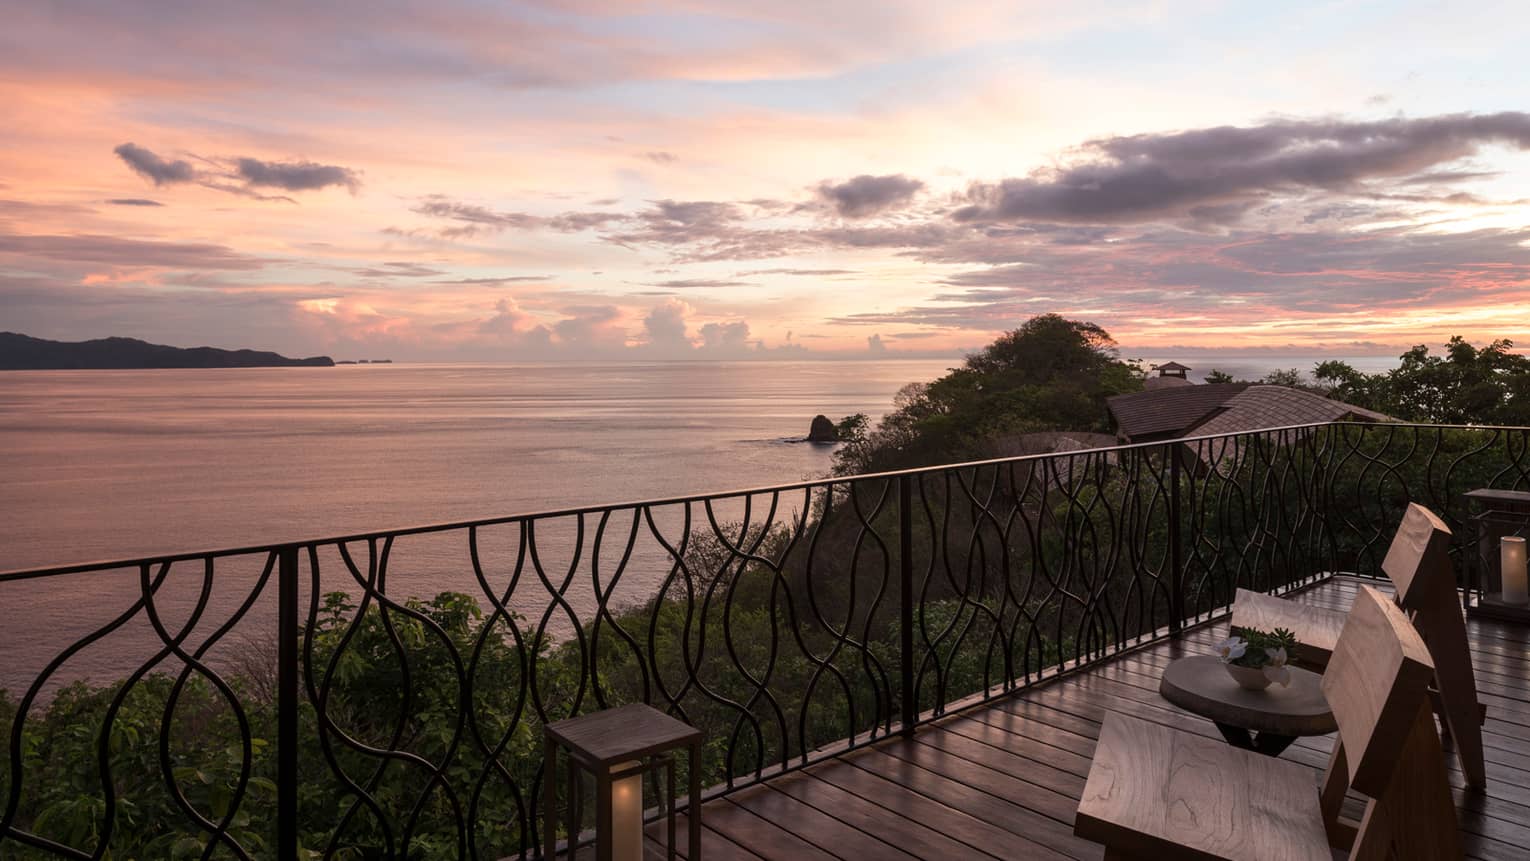 Patio chairs on wood deck with iron balcony at sunset, high above trees and ocean